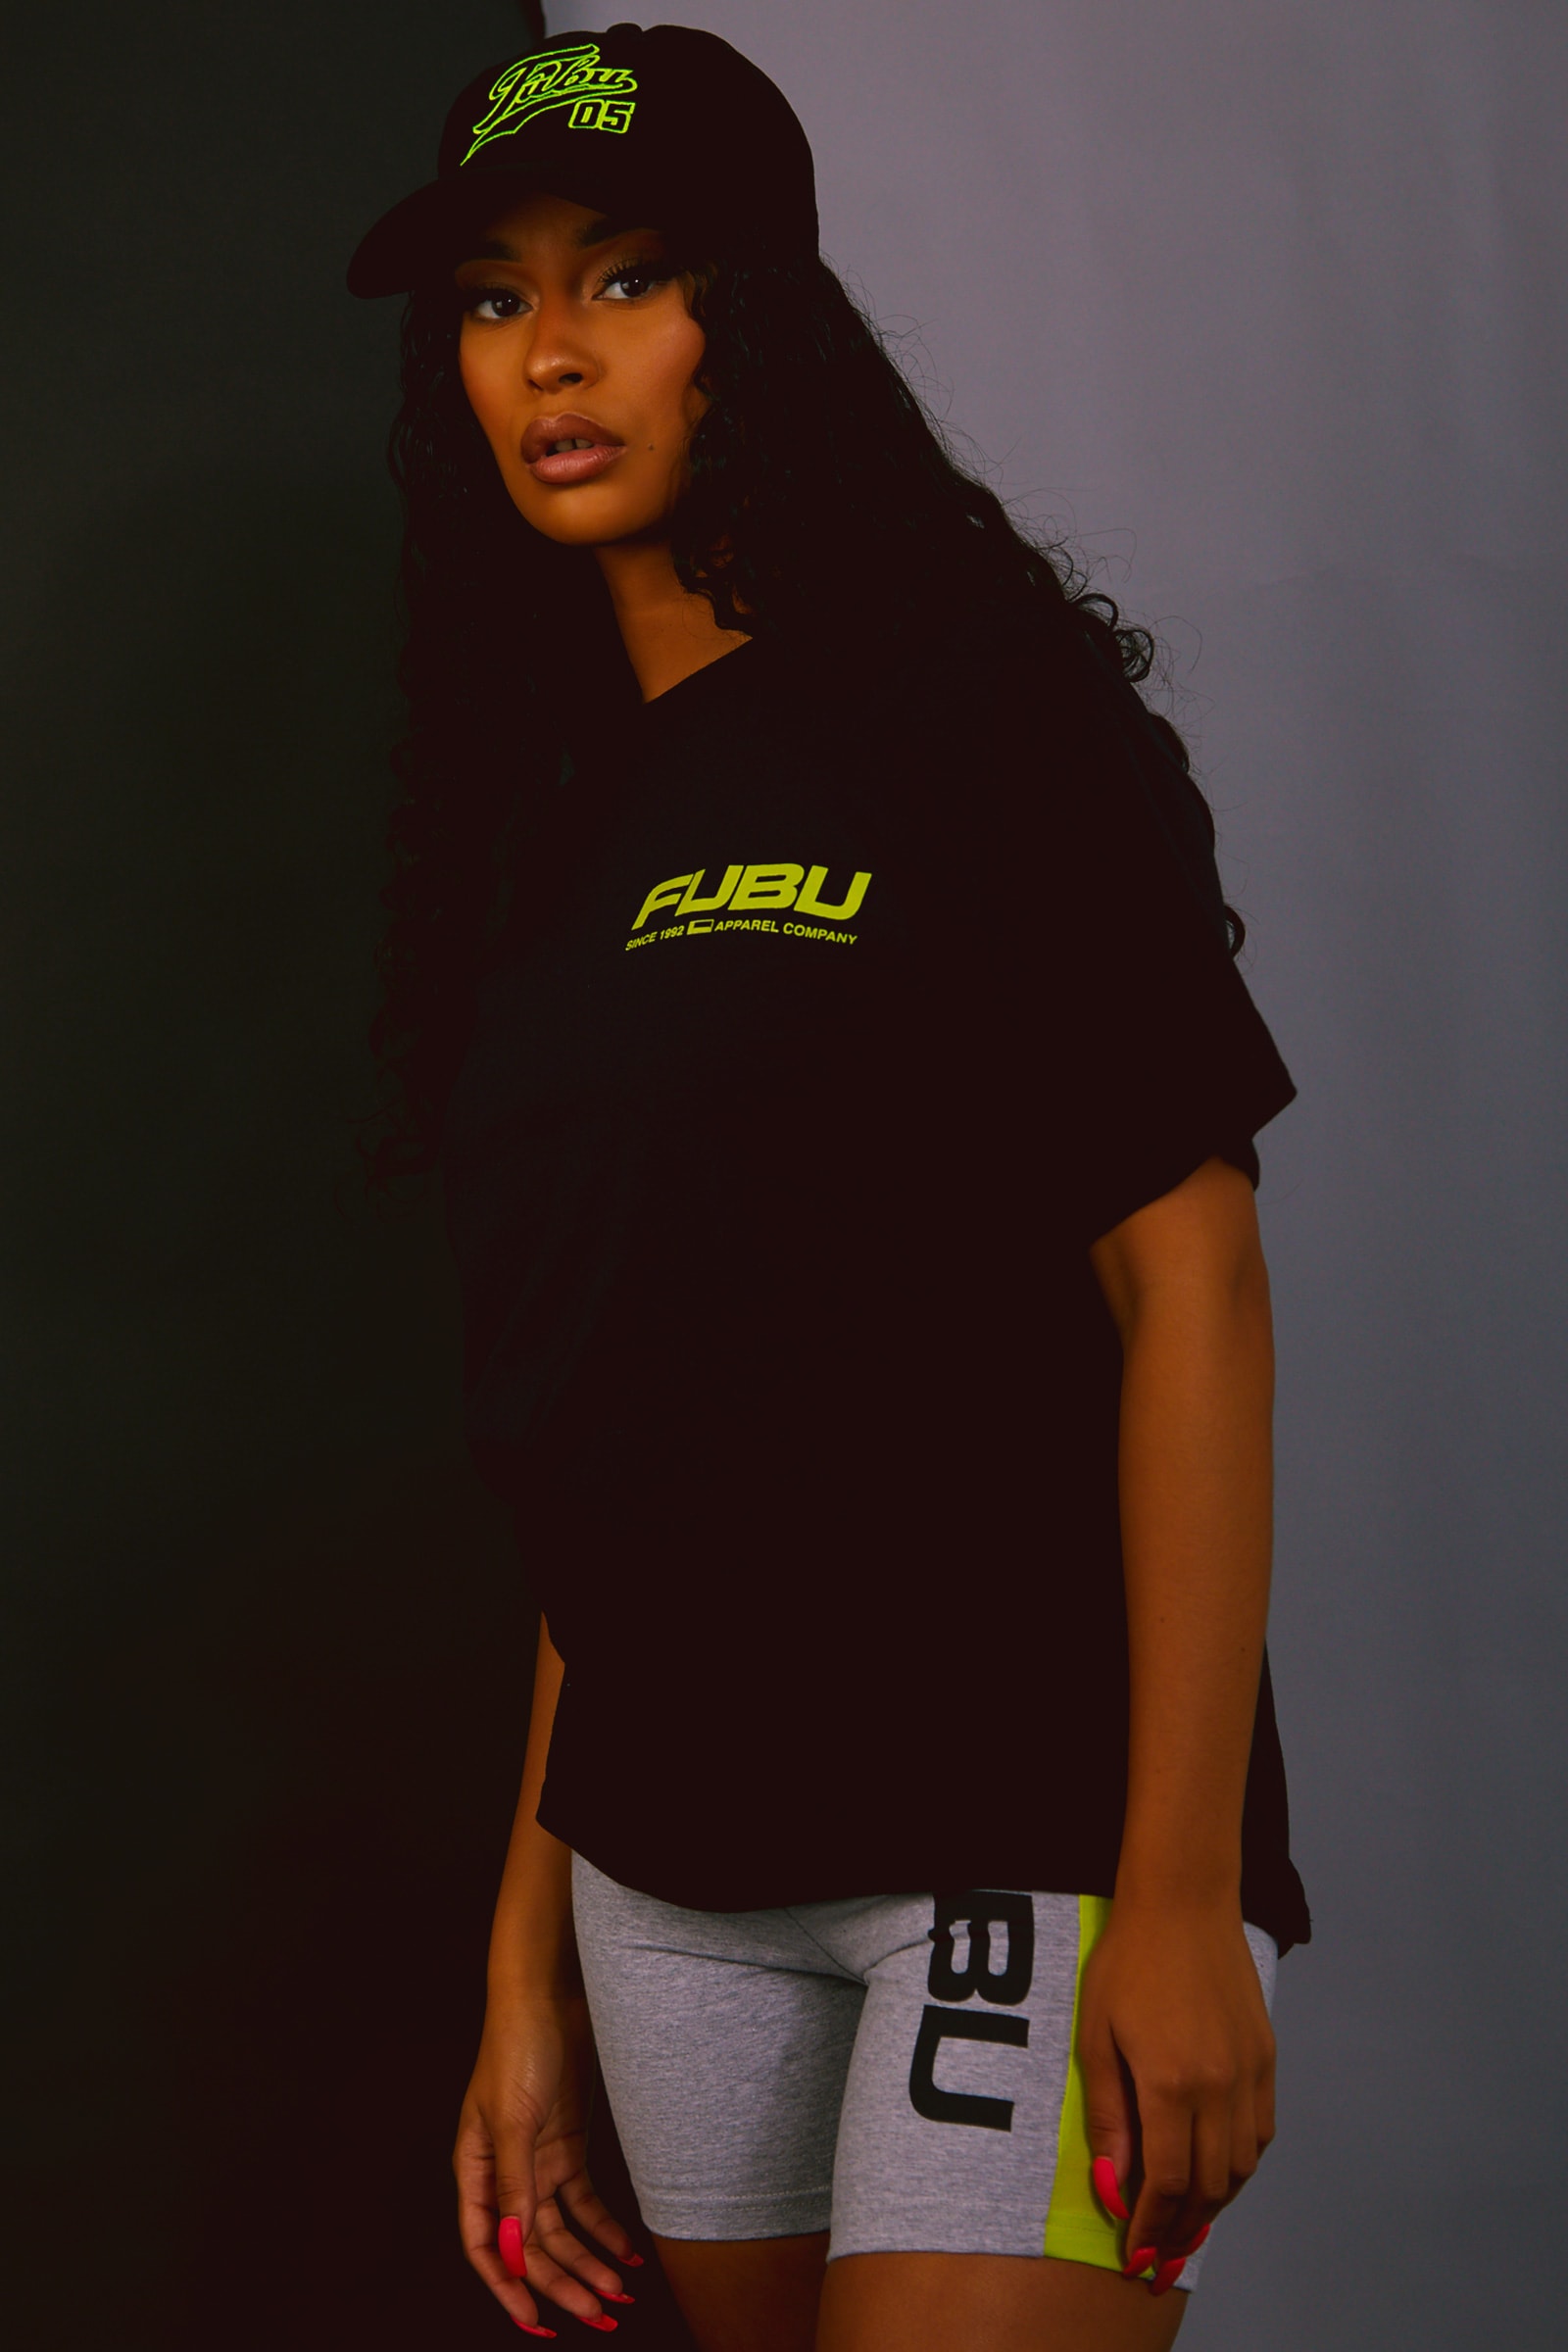 Fubu Continues Its Comeback With Focus on Women by Partnering With